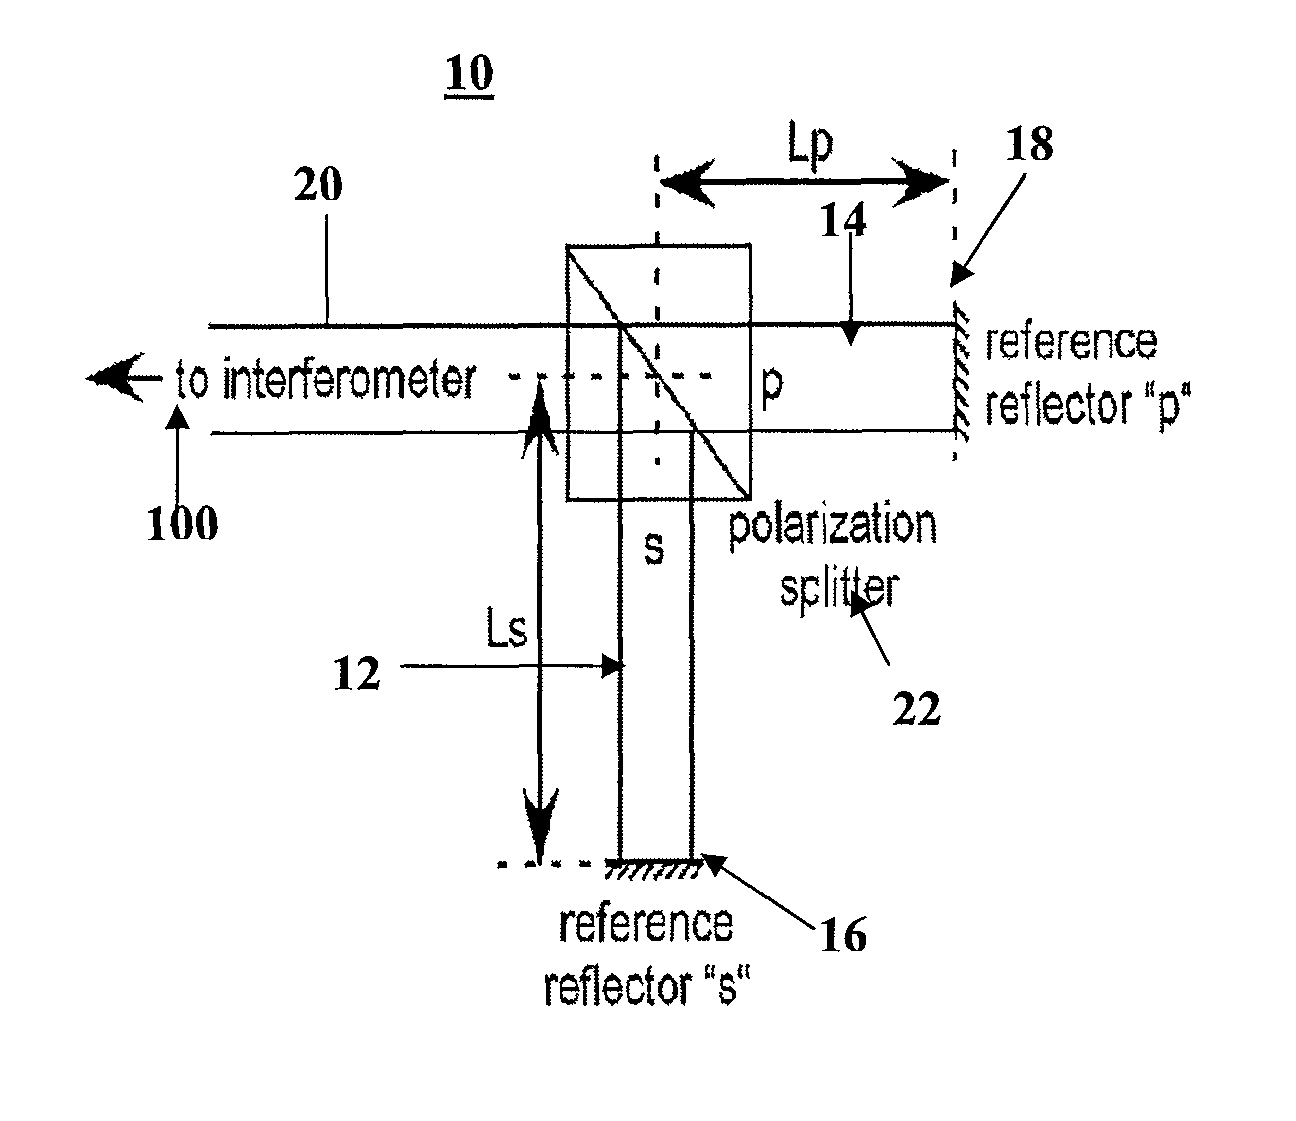 Optical coherence tomography implementation apparatus and method of use